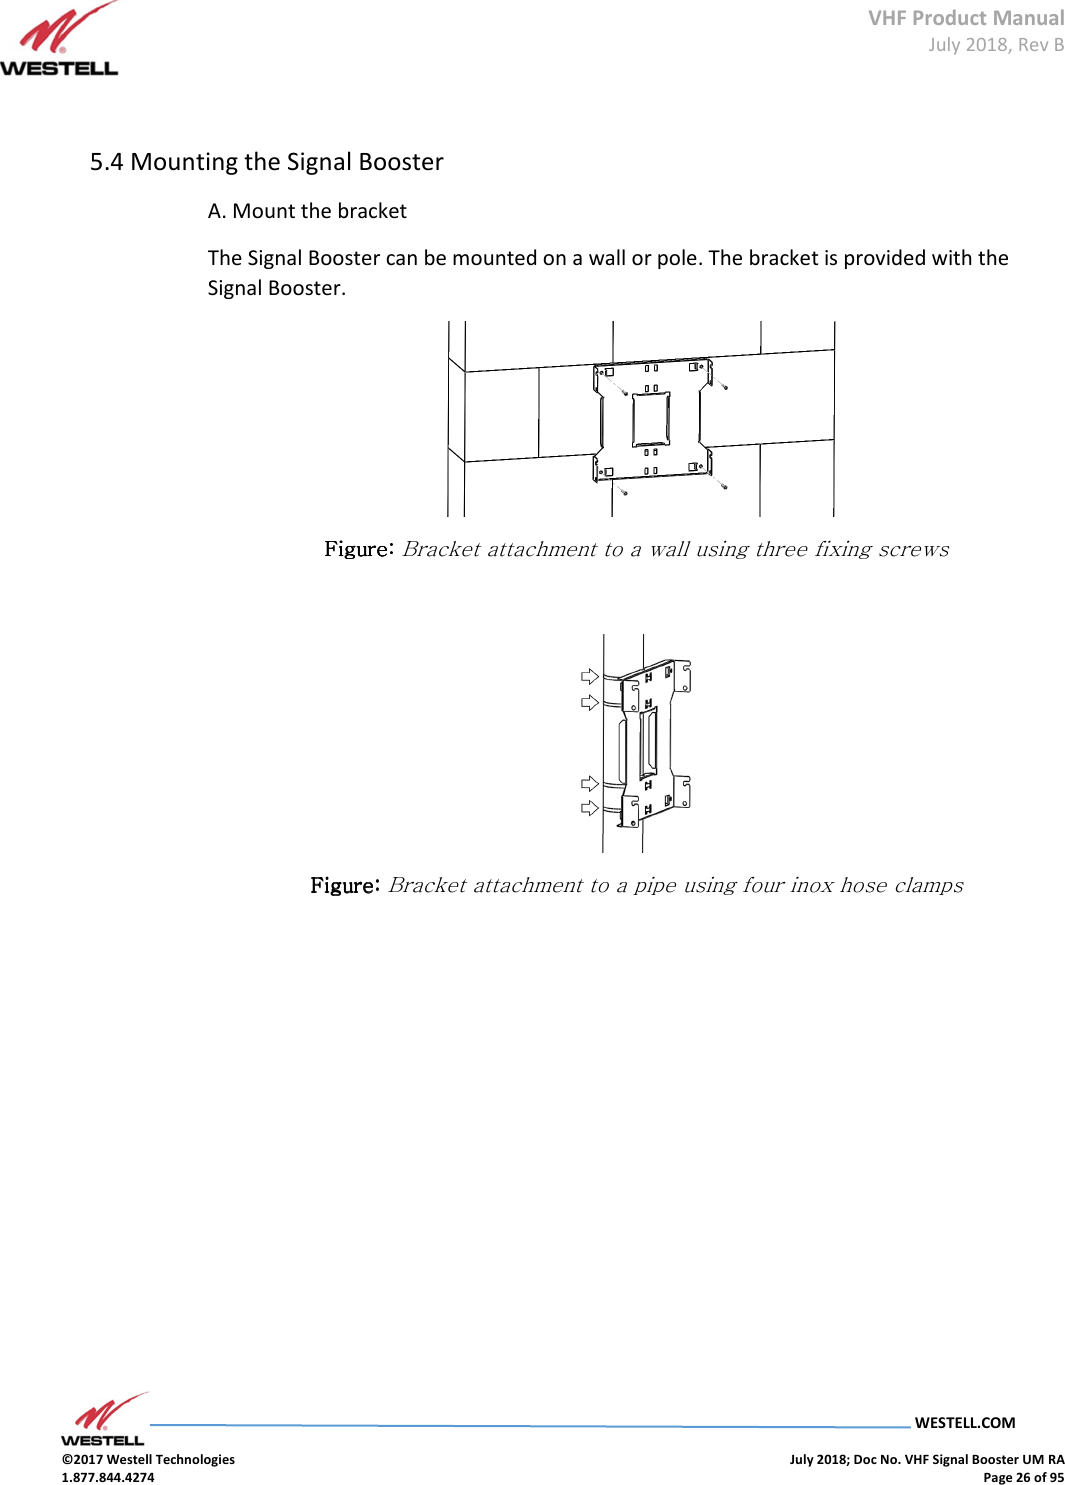 VHF Product Manual July 2018, Rev B   WESTELL.COM  ©2017 Westell Technologies    July 2018; Doc No. VHF Signal Booster UM RA 1.877.844.4274    Page 26 of 95   5.4 Mounting the Signal Booster  A. Mount the bracket The Signal Booster can be mounted on a wall or pole. The bracket is provided with the Signal Booster.  Figure: Figure: Figure: Figure: Bracket attachment to a wall using three fixing screws   Figure: Figure: Figure: Figure: Bracket attachment to a pipe using four inox hose clamps     